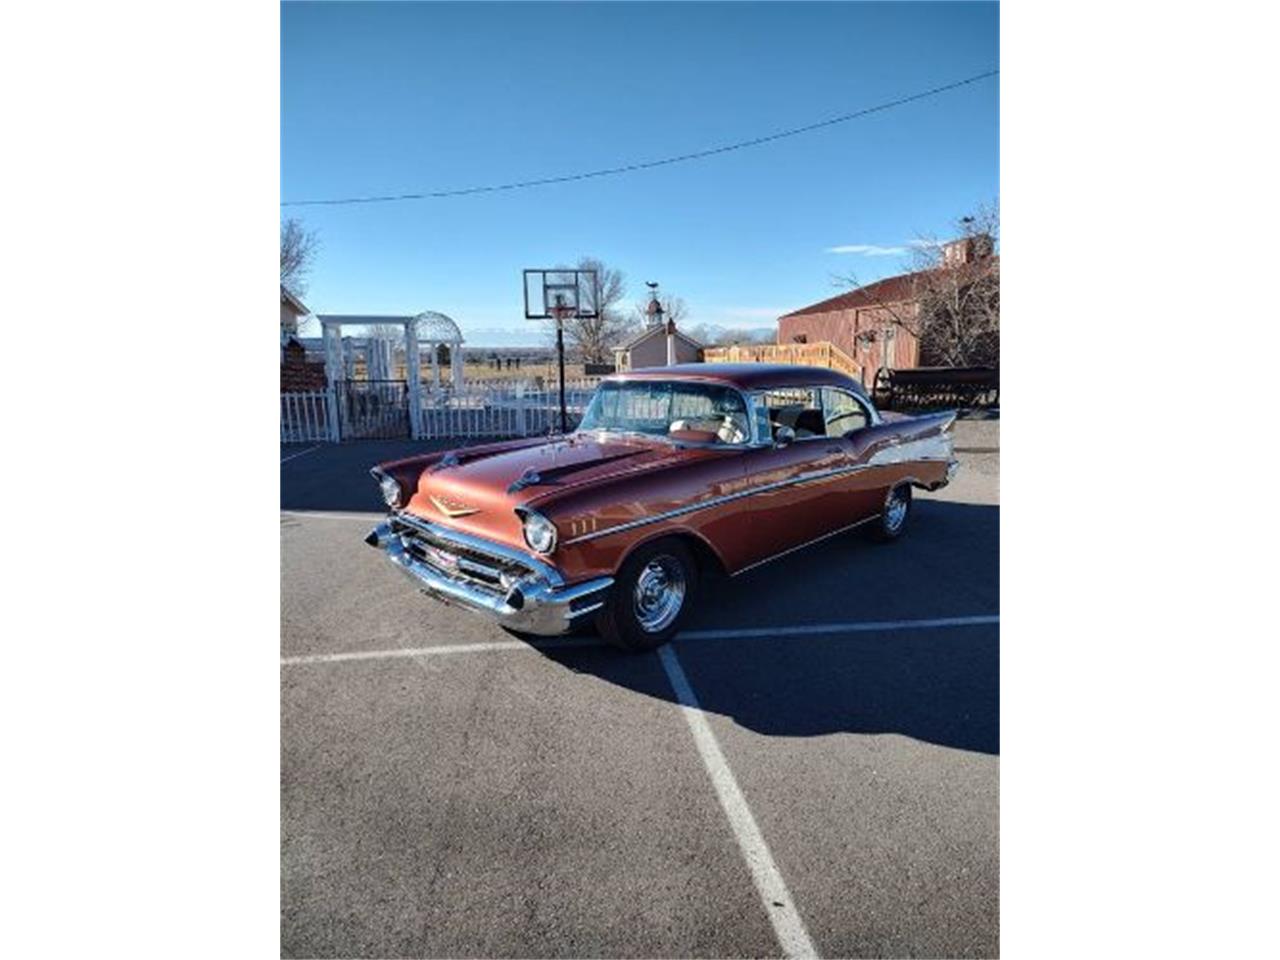 For Sale: 1967 Chevrolet Bel Air in Cadillac, Michigan for sale in Cadillac, MI